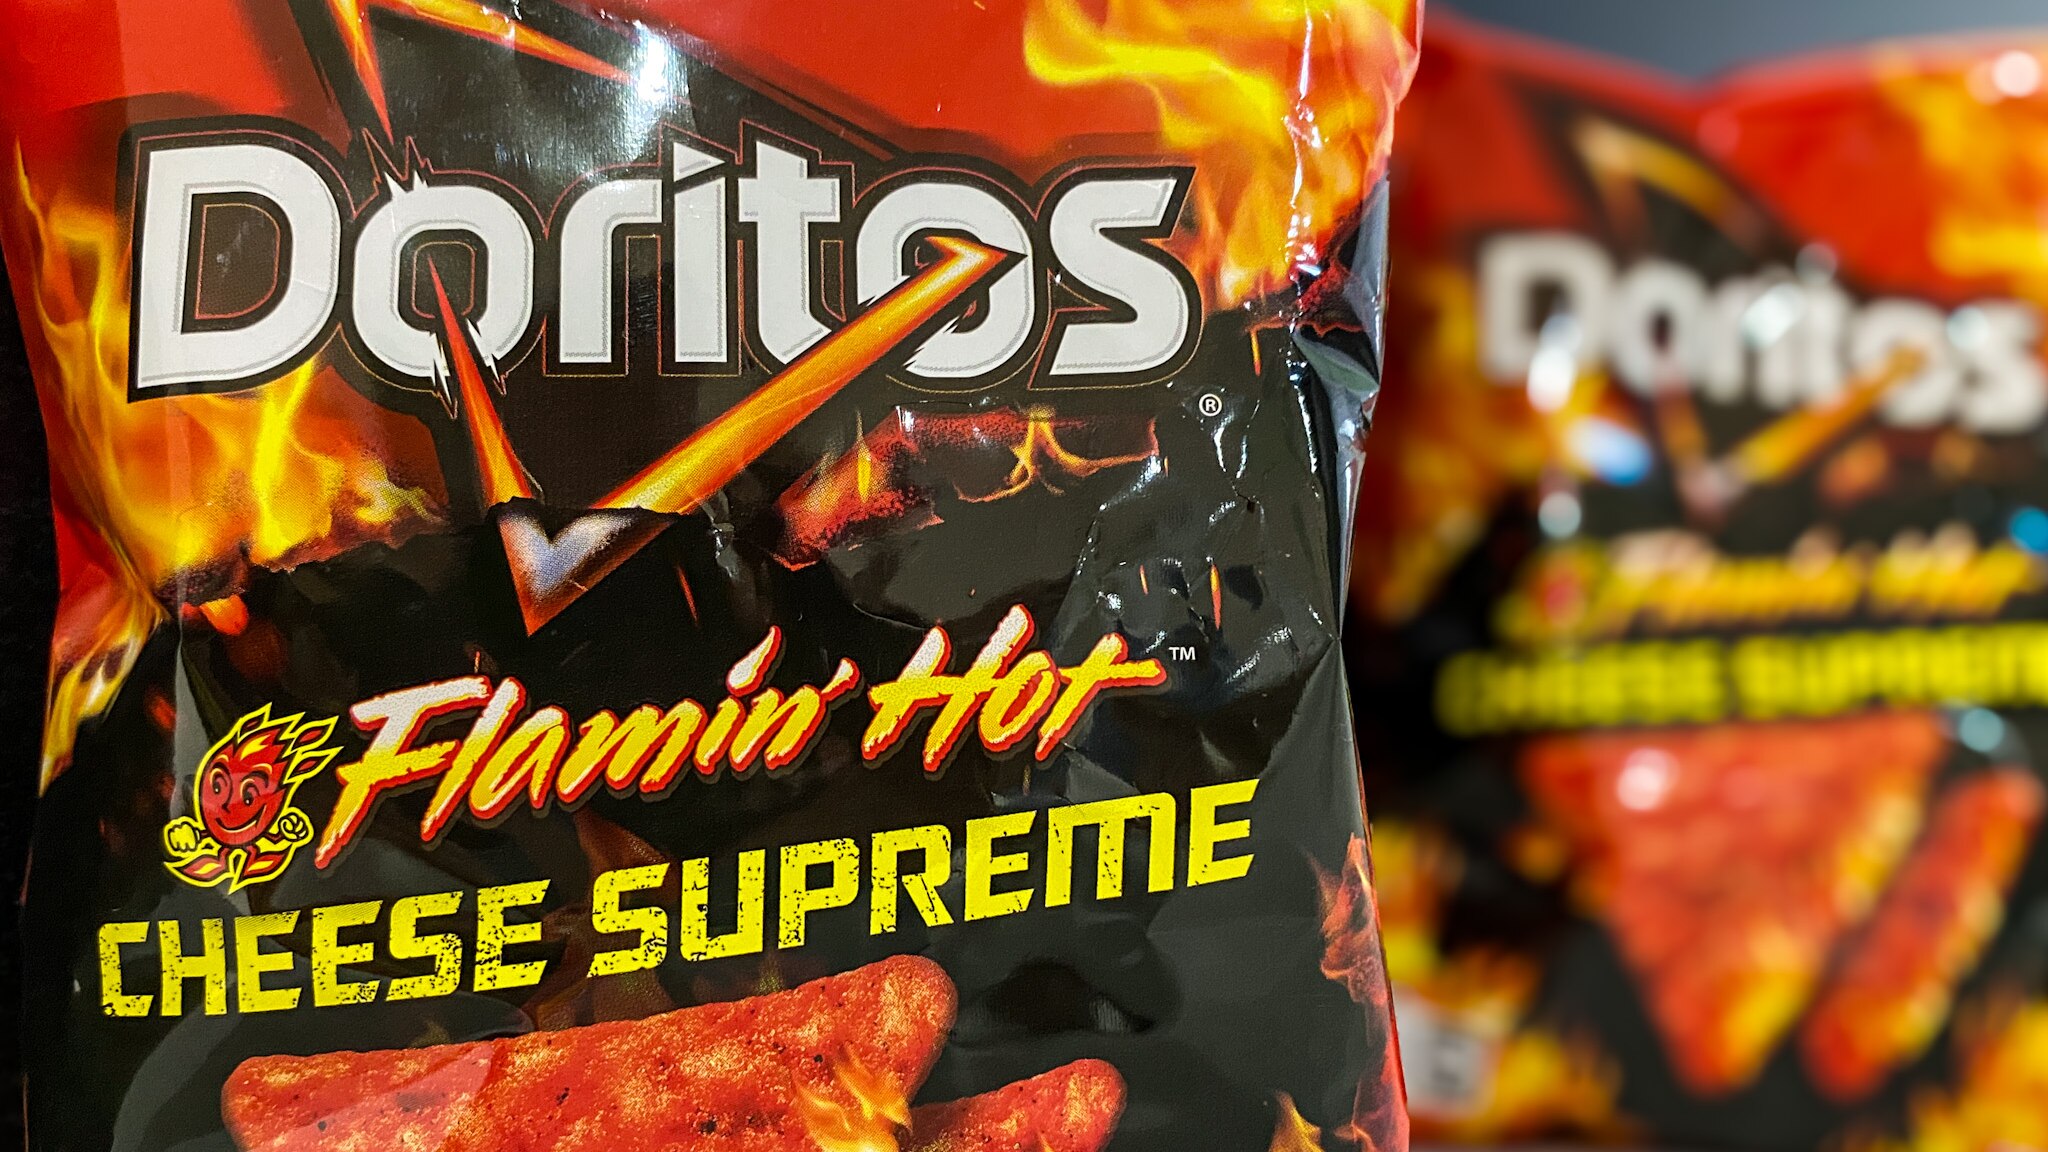 spicy doritos seasoning leaving workers with 'skin irritation' and 'difficulty breathing' at smith's chips factory, union claims